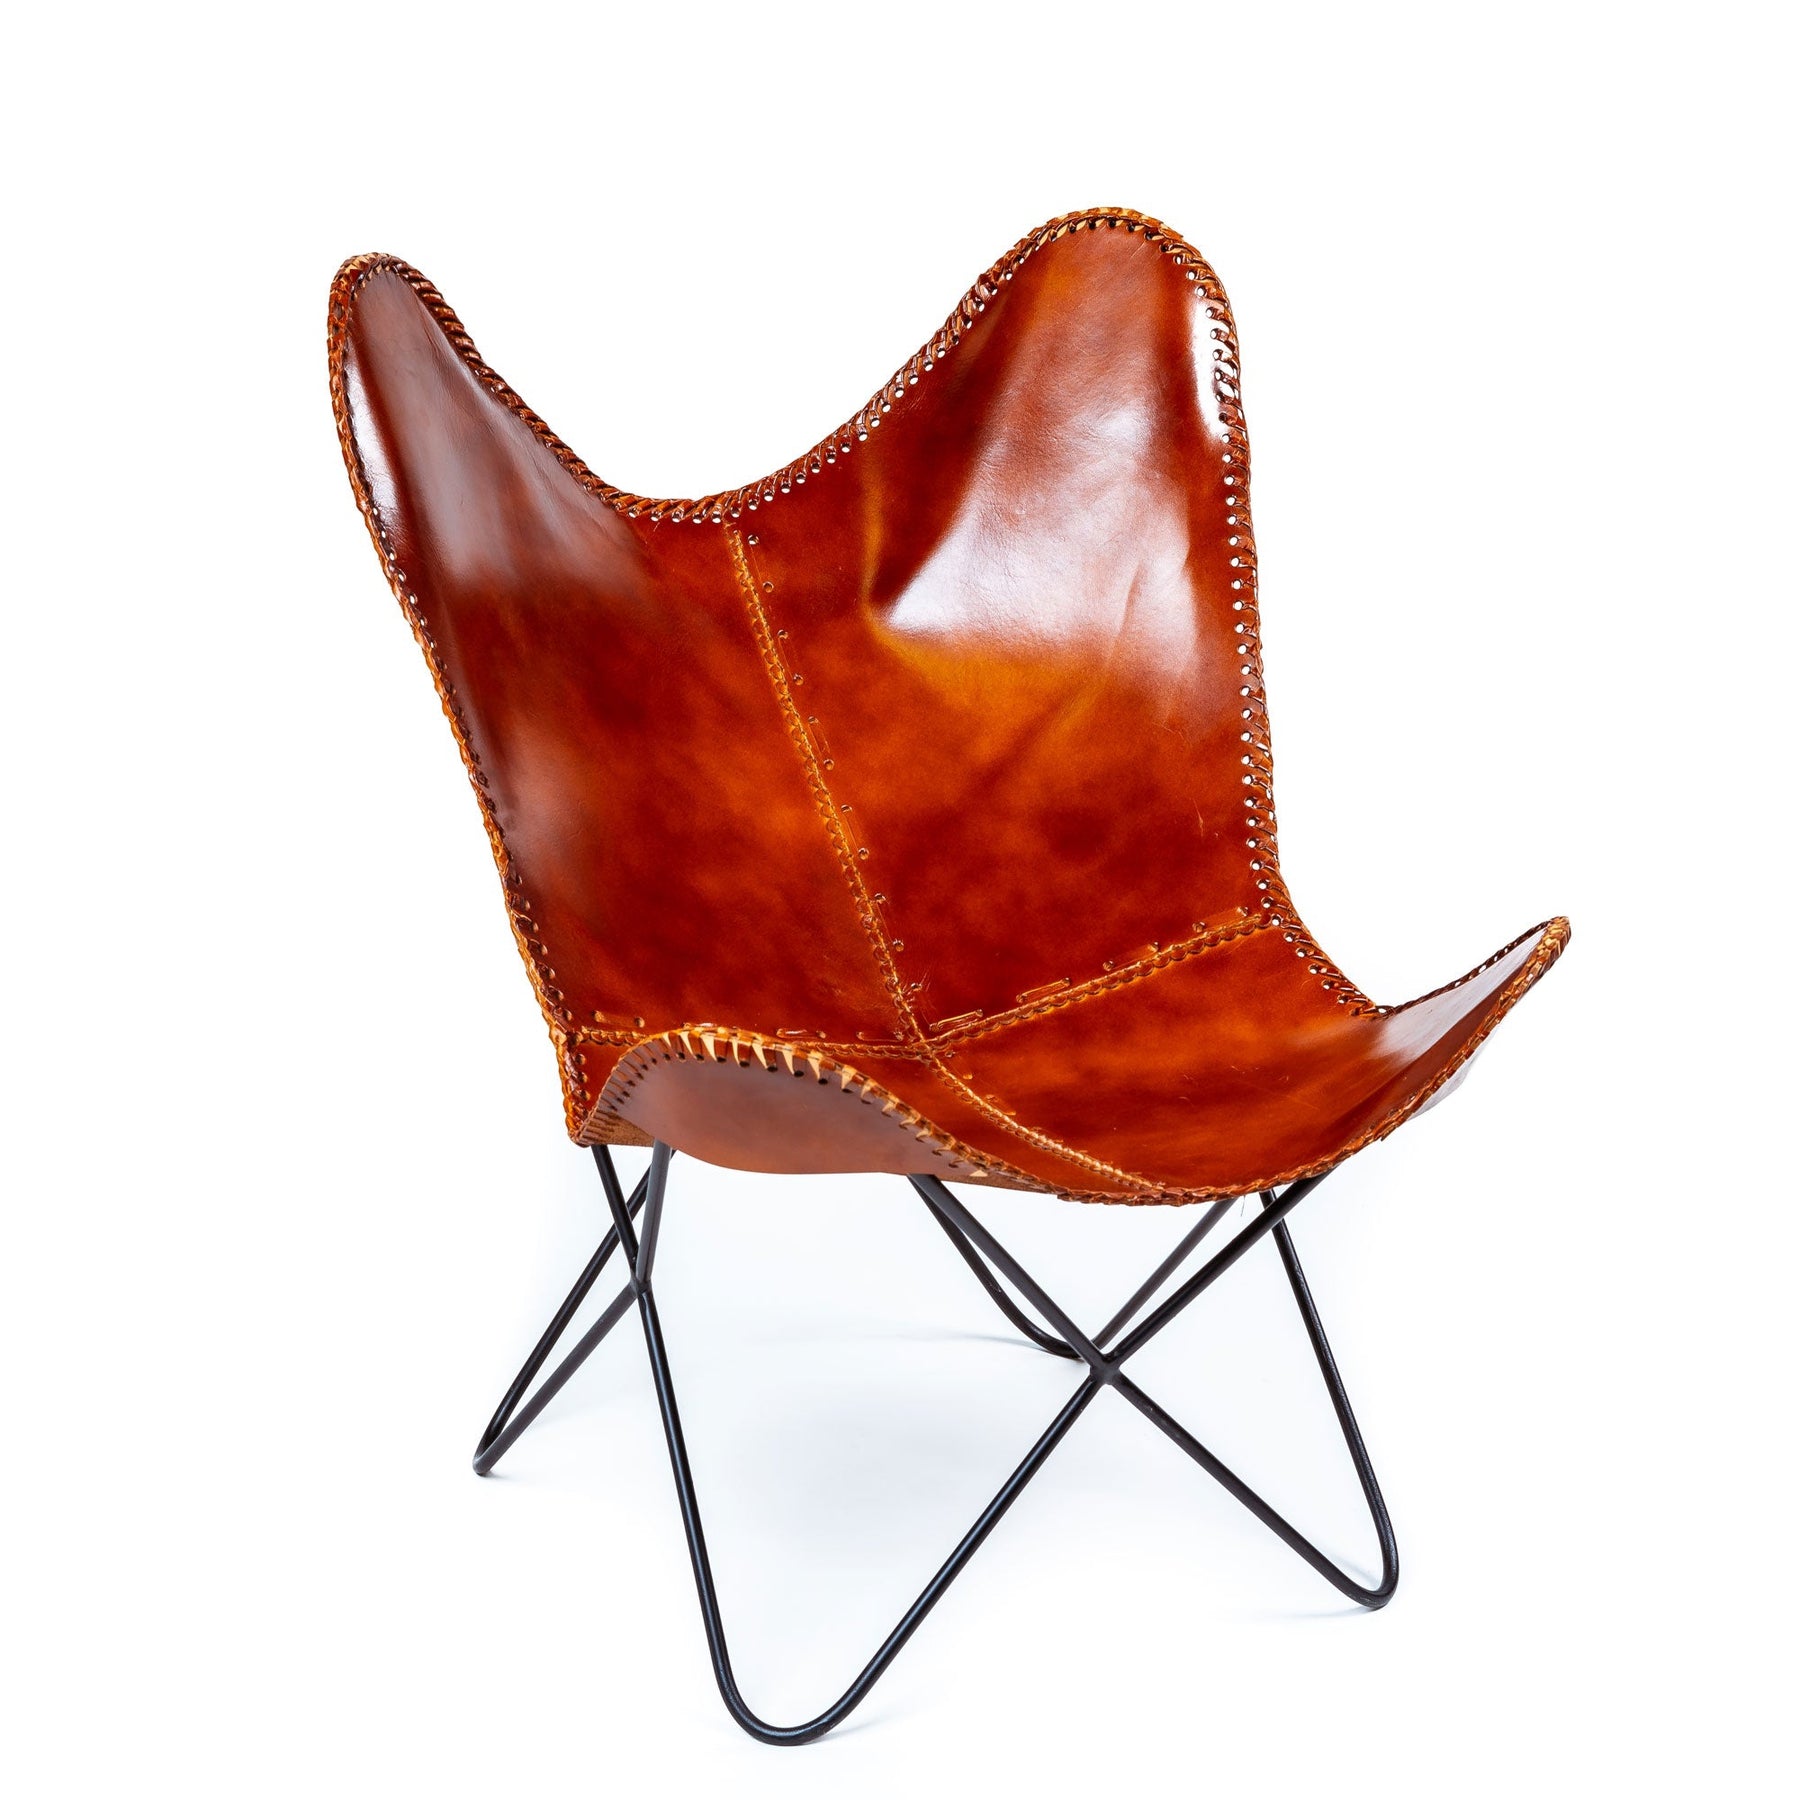 Leather Butterfly Chair | Living Room Brown Leather Chair | 27 x 30 x 29 inches